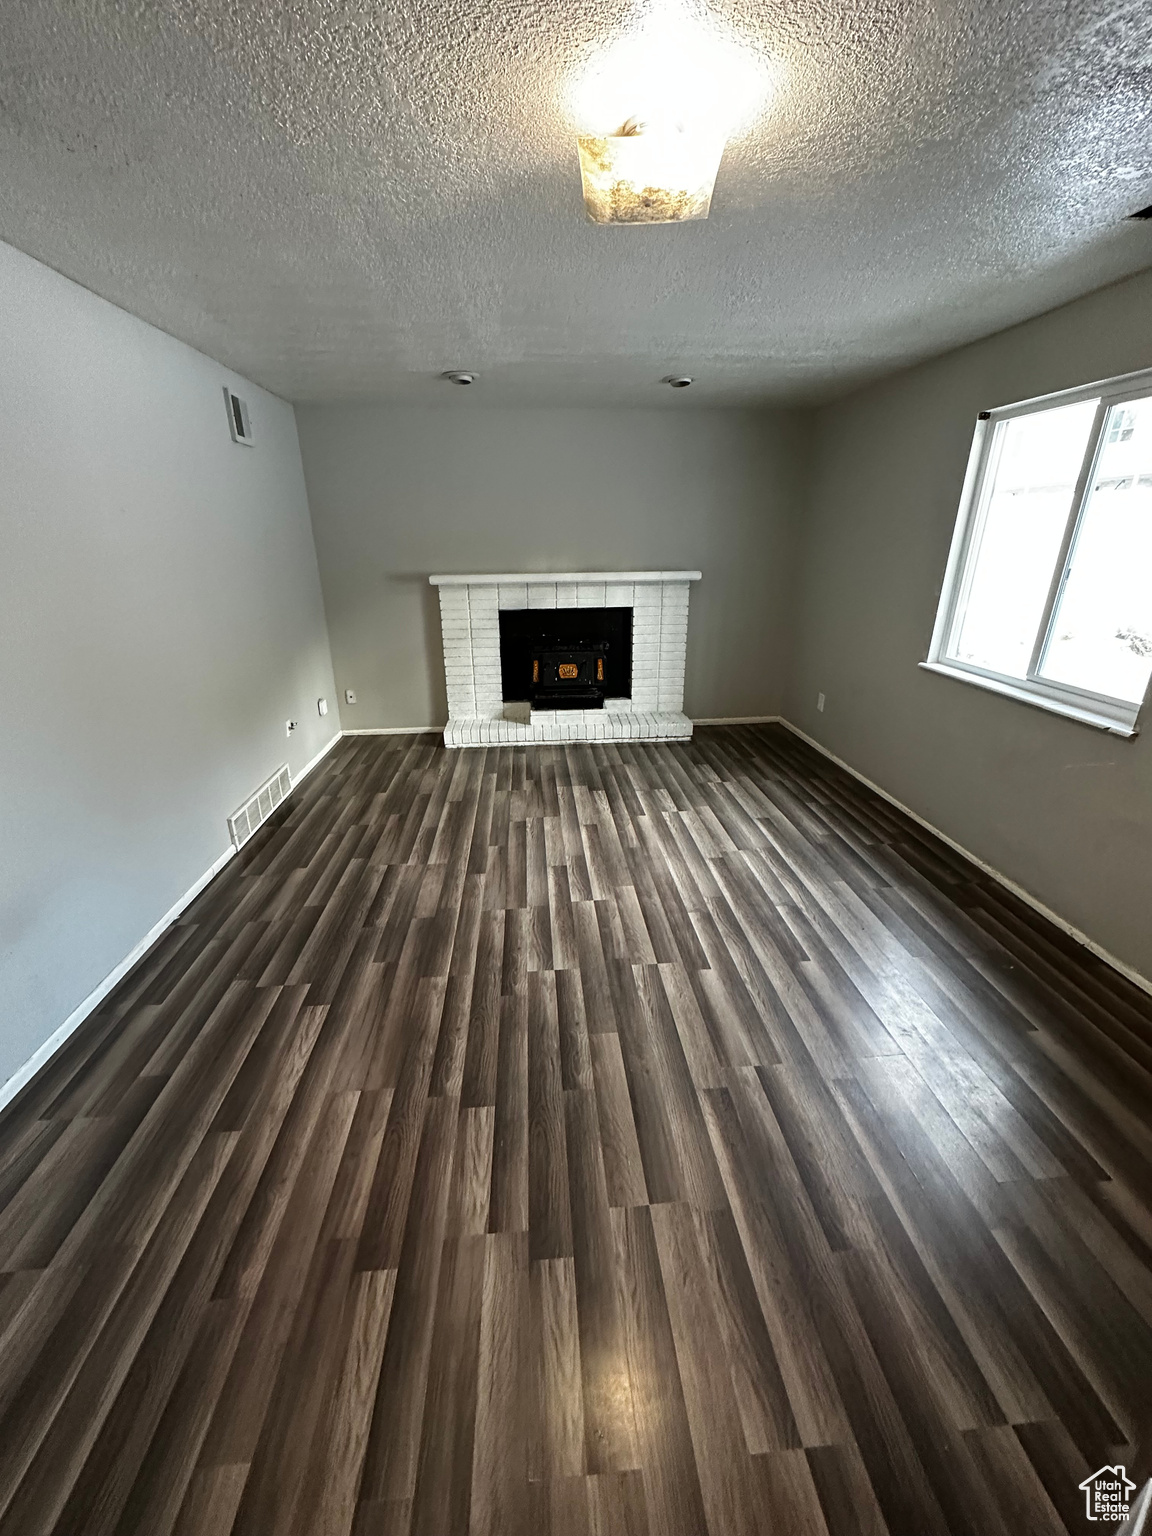 Unfurnished living room with dark hardwood / wood-style flooring, a textured ceiling, and a fireplace